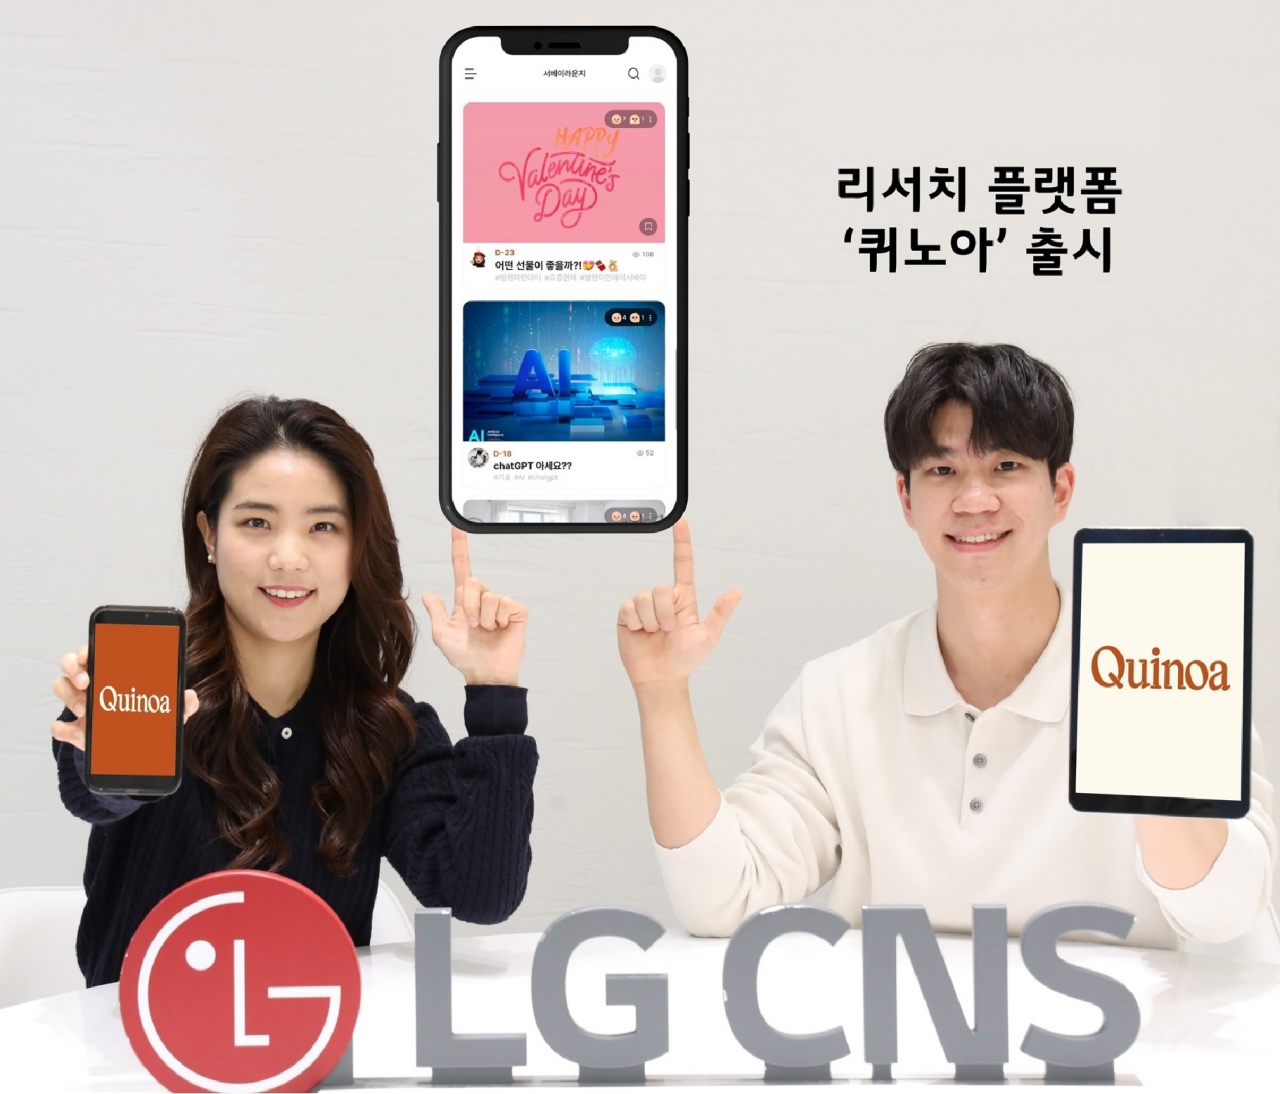 Promotional image for LG CNS's new research platform Quinoa (LG CNS)